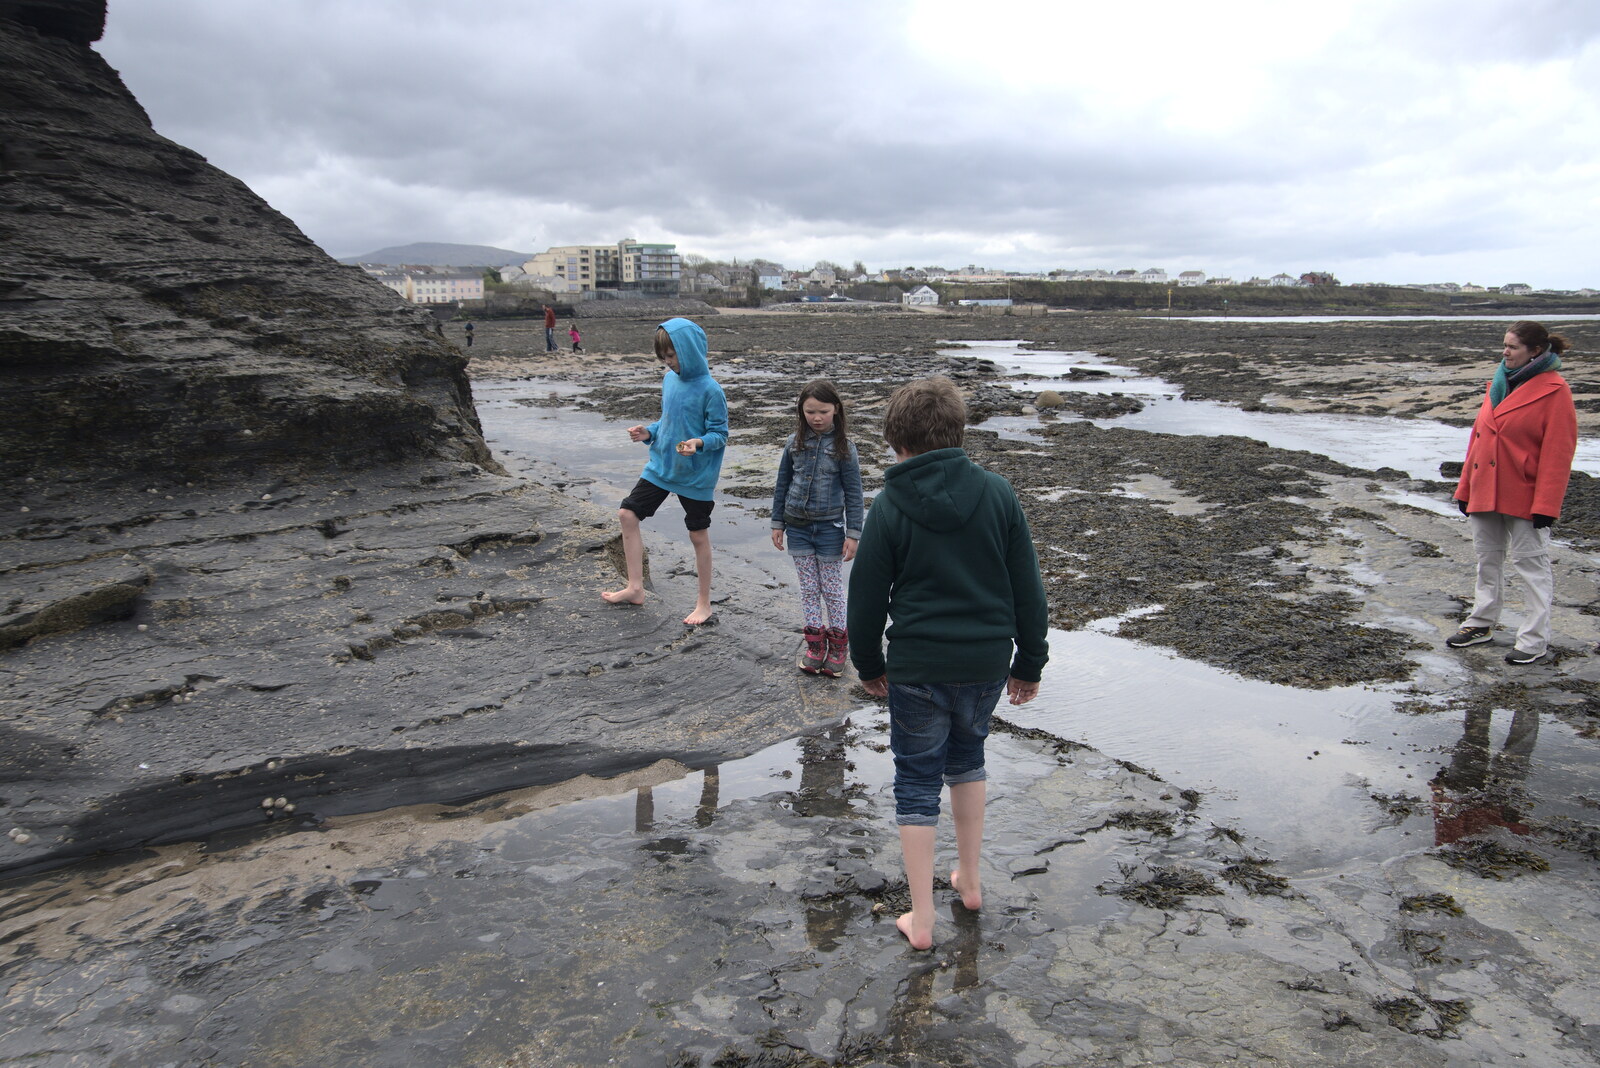 The gang on the rocks from Manorhamilton and Bundoran, Leitrim and Donegal, Ireland - 16th April 2022